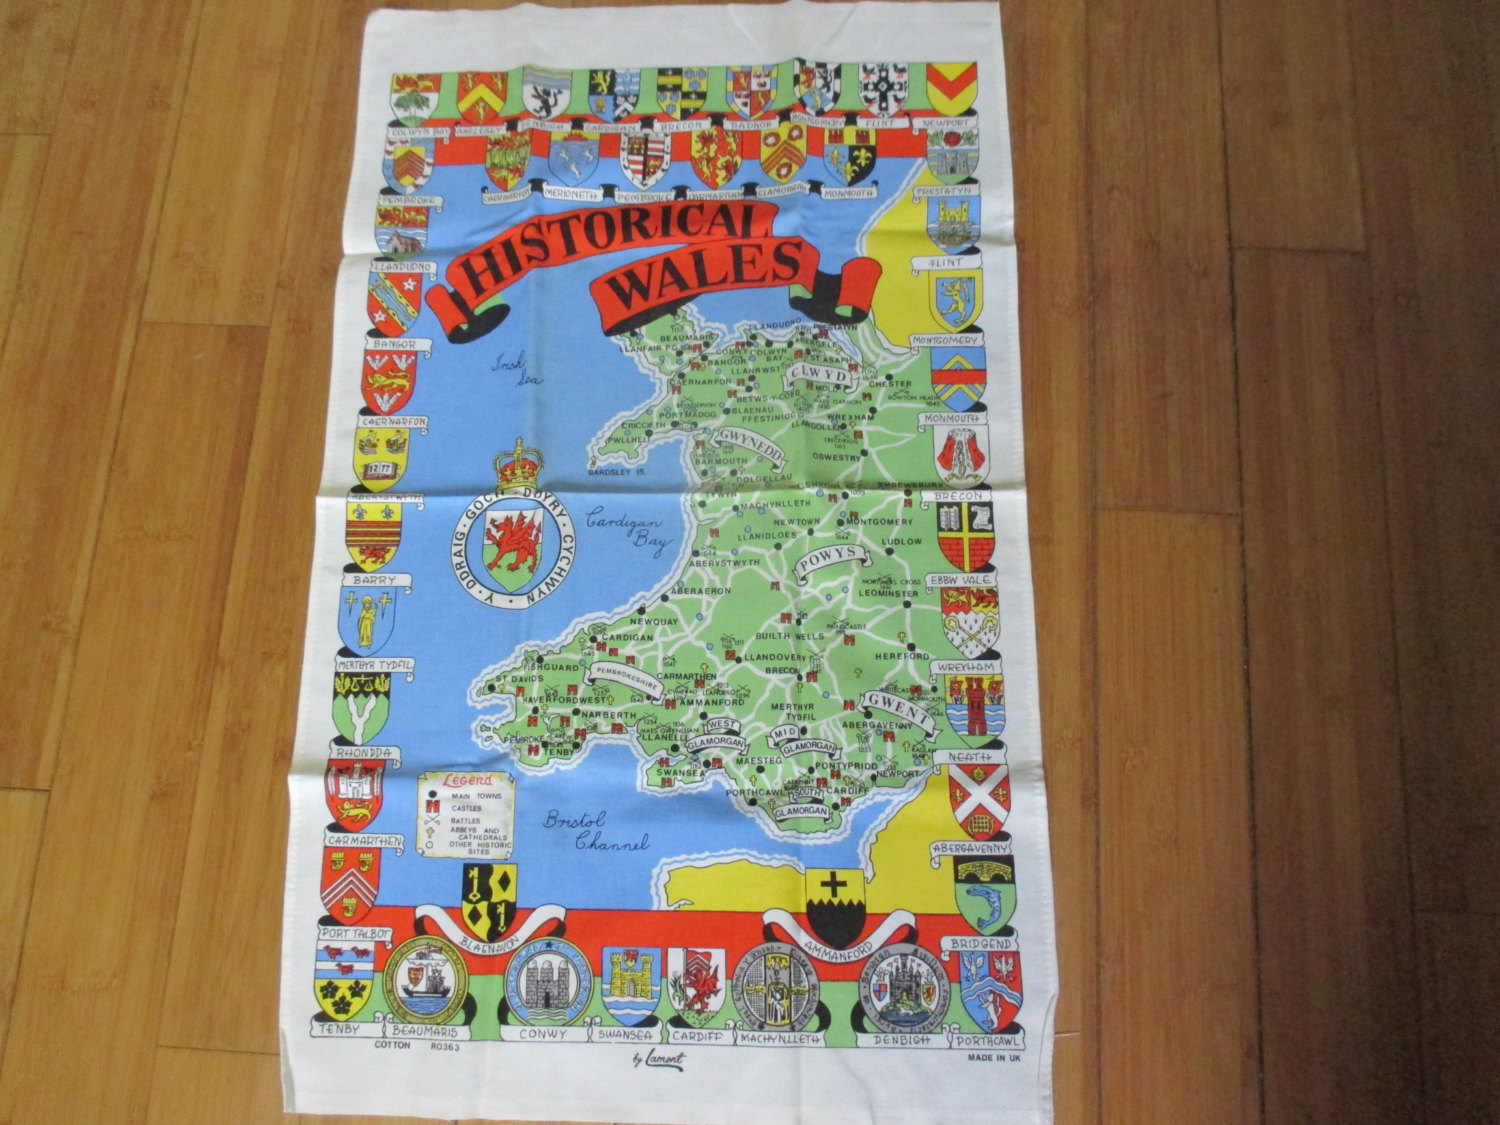 https://www.truevintageantiques.com/wp-content/uploads/2017/07/mid-century-colorful-kitchen-towel-new-old-stock-unused-100-cotton-vivid-colors-historical-wales-flags-country-bristol-channel-595be9461.jpg